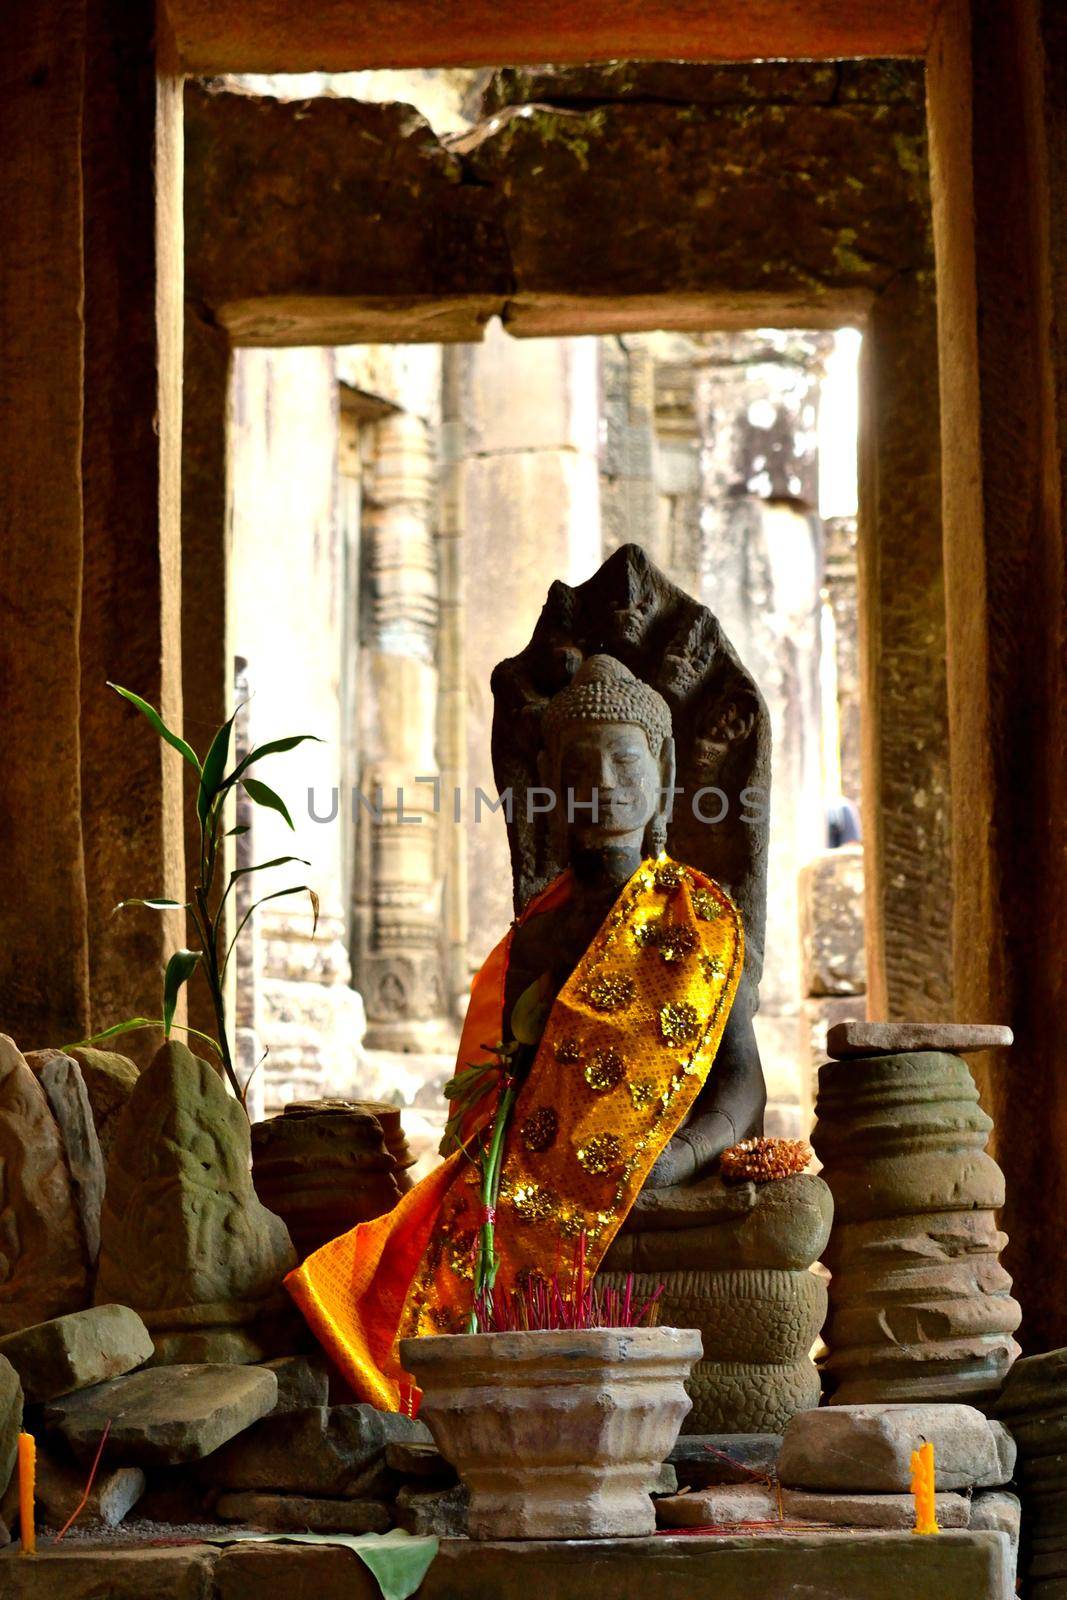 View of a beautiful statue adorned in the Bayon temple in the Angkor Thom complex, Cambodia